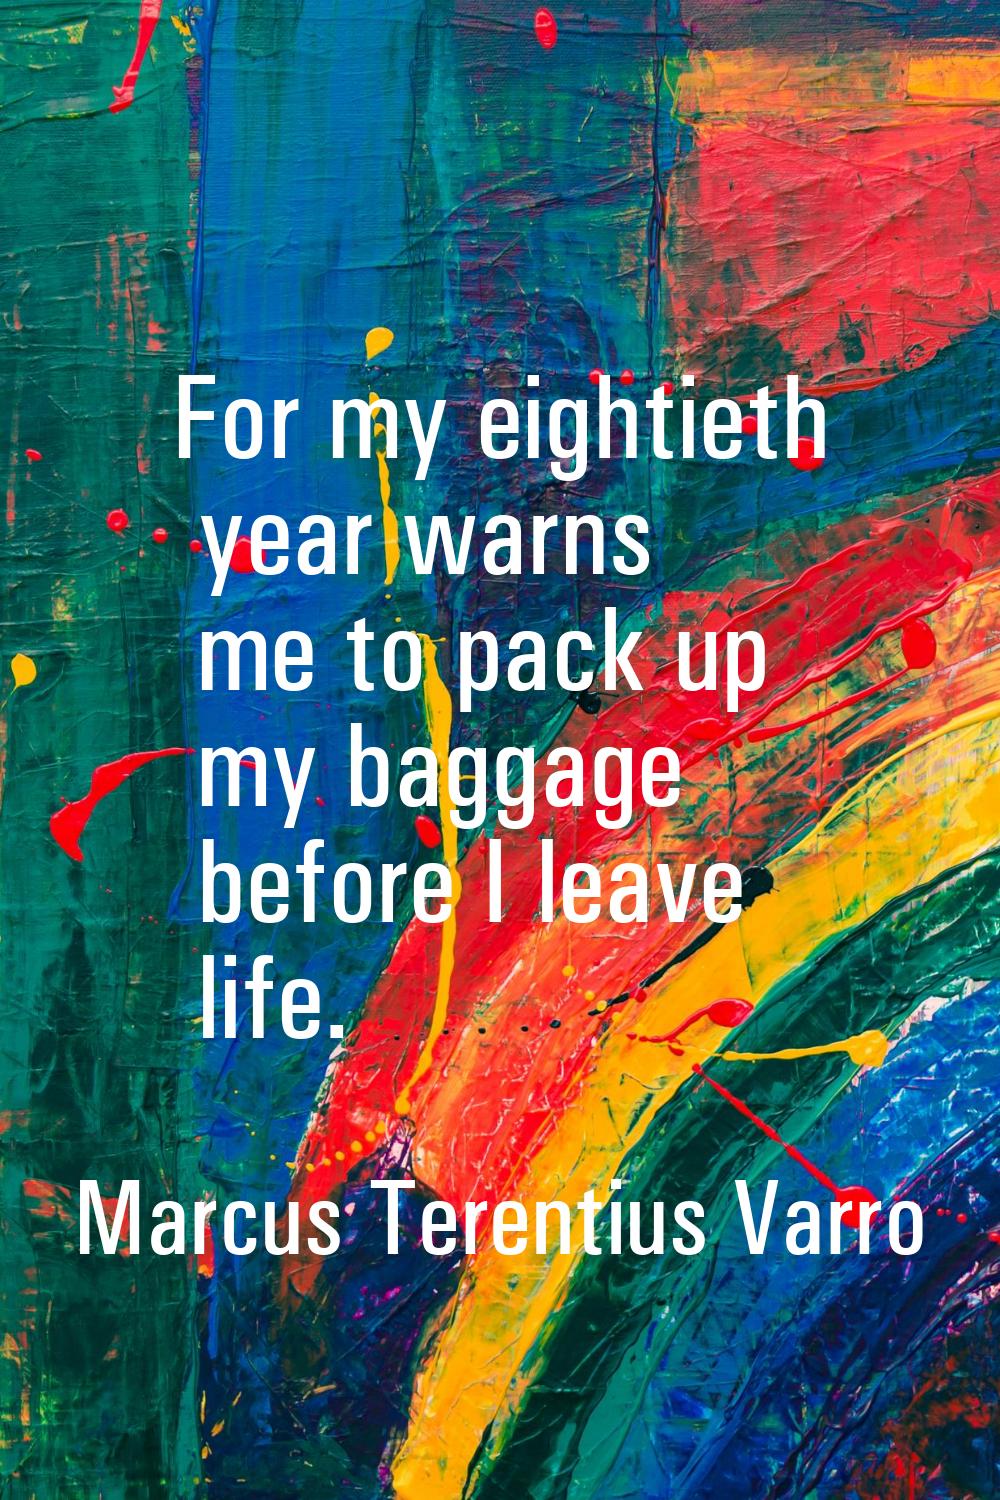 For my eightieth year warns me to pack up my baggage before I leave life.